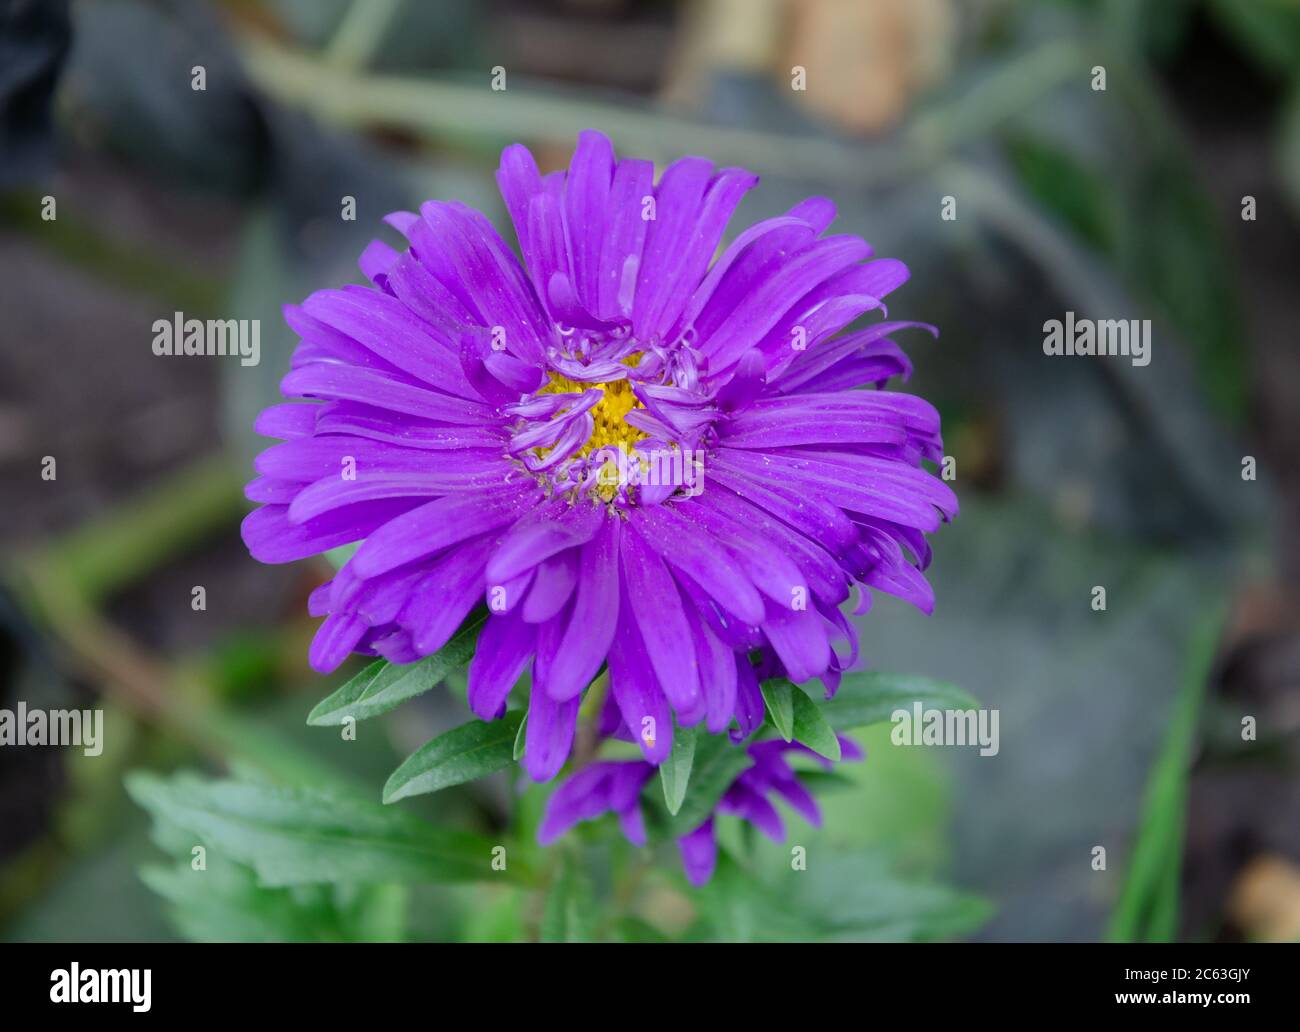 aster flower with beautiful purple petals on a green background in the autumn garden, close-up Stock Photo